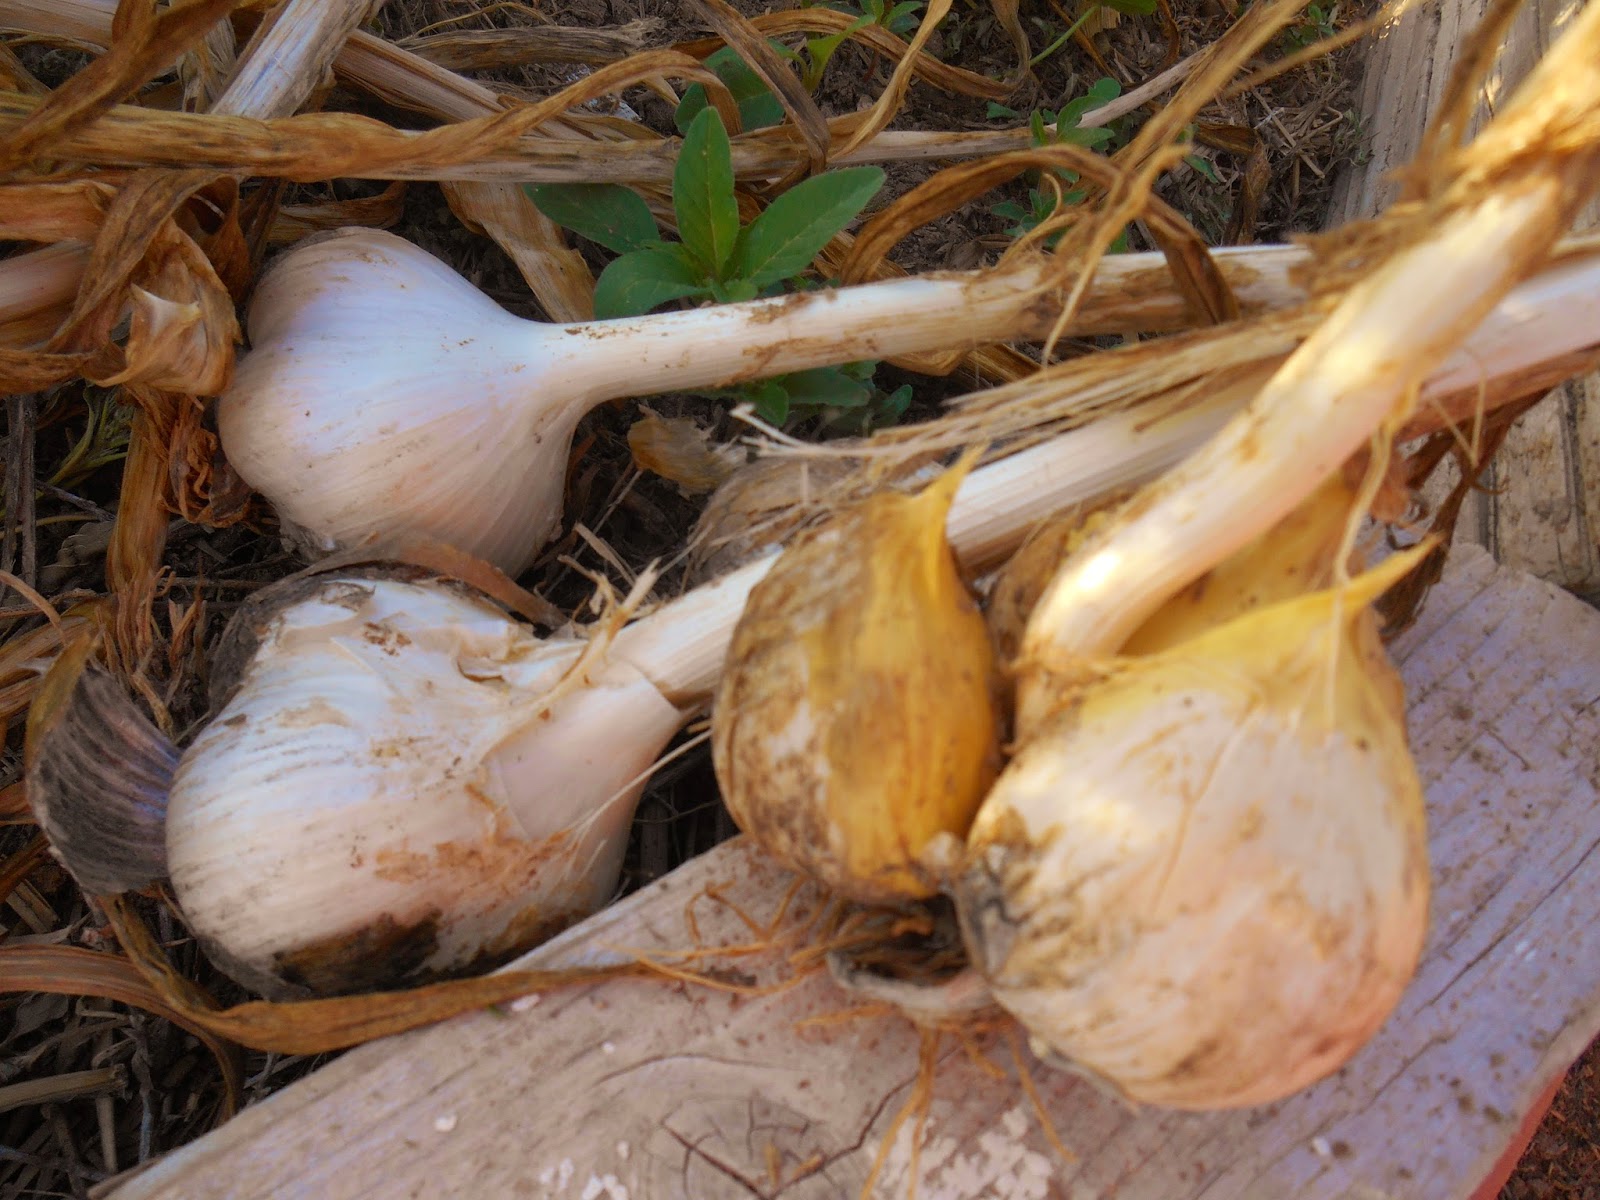 Cricket Song Farm Now Is The Time To Plant Garlic And